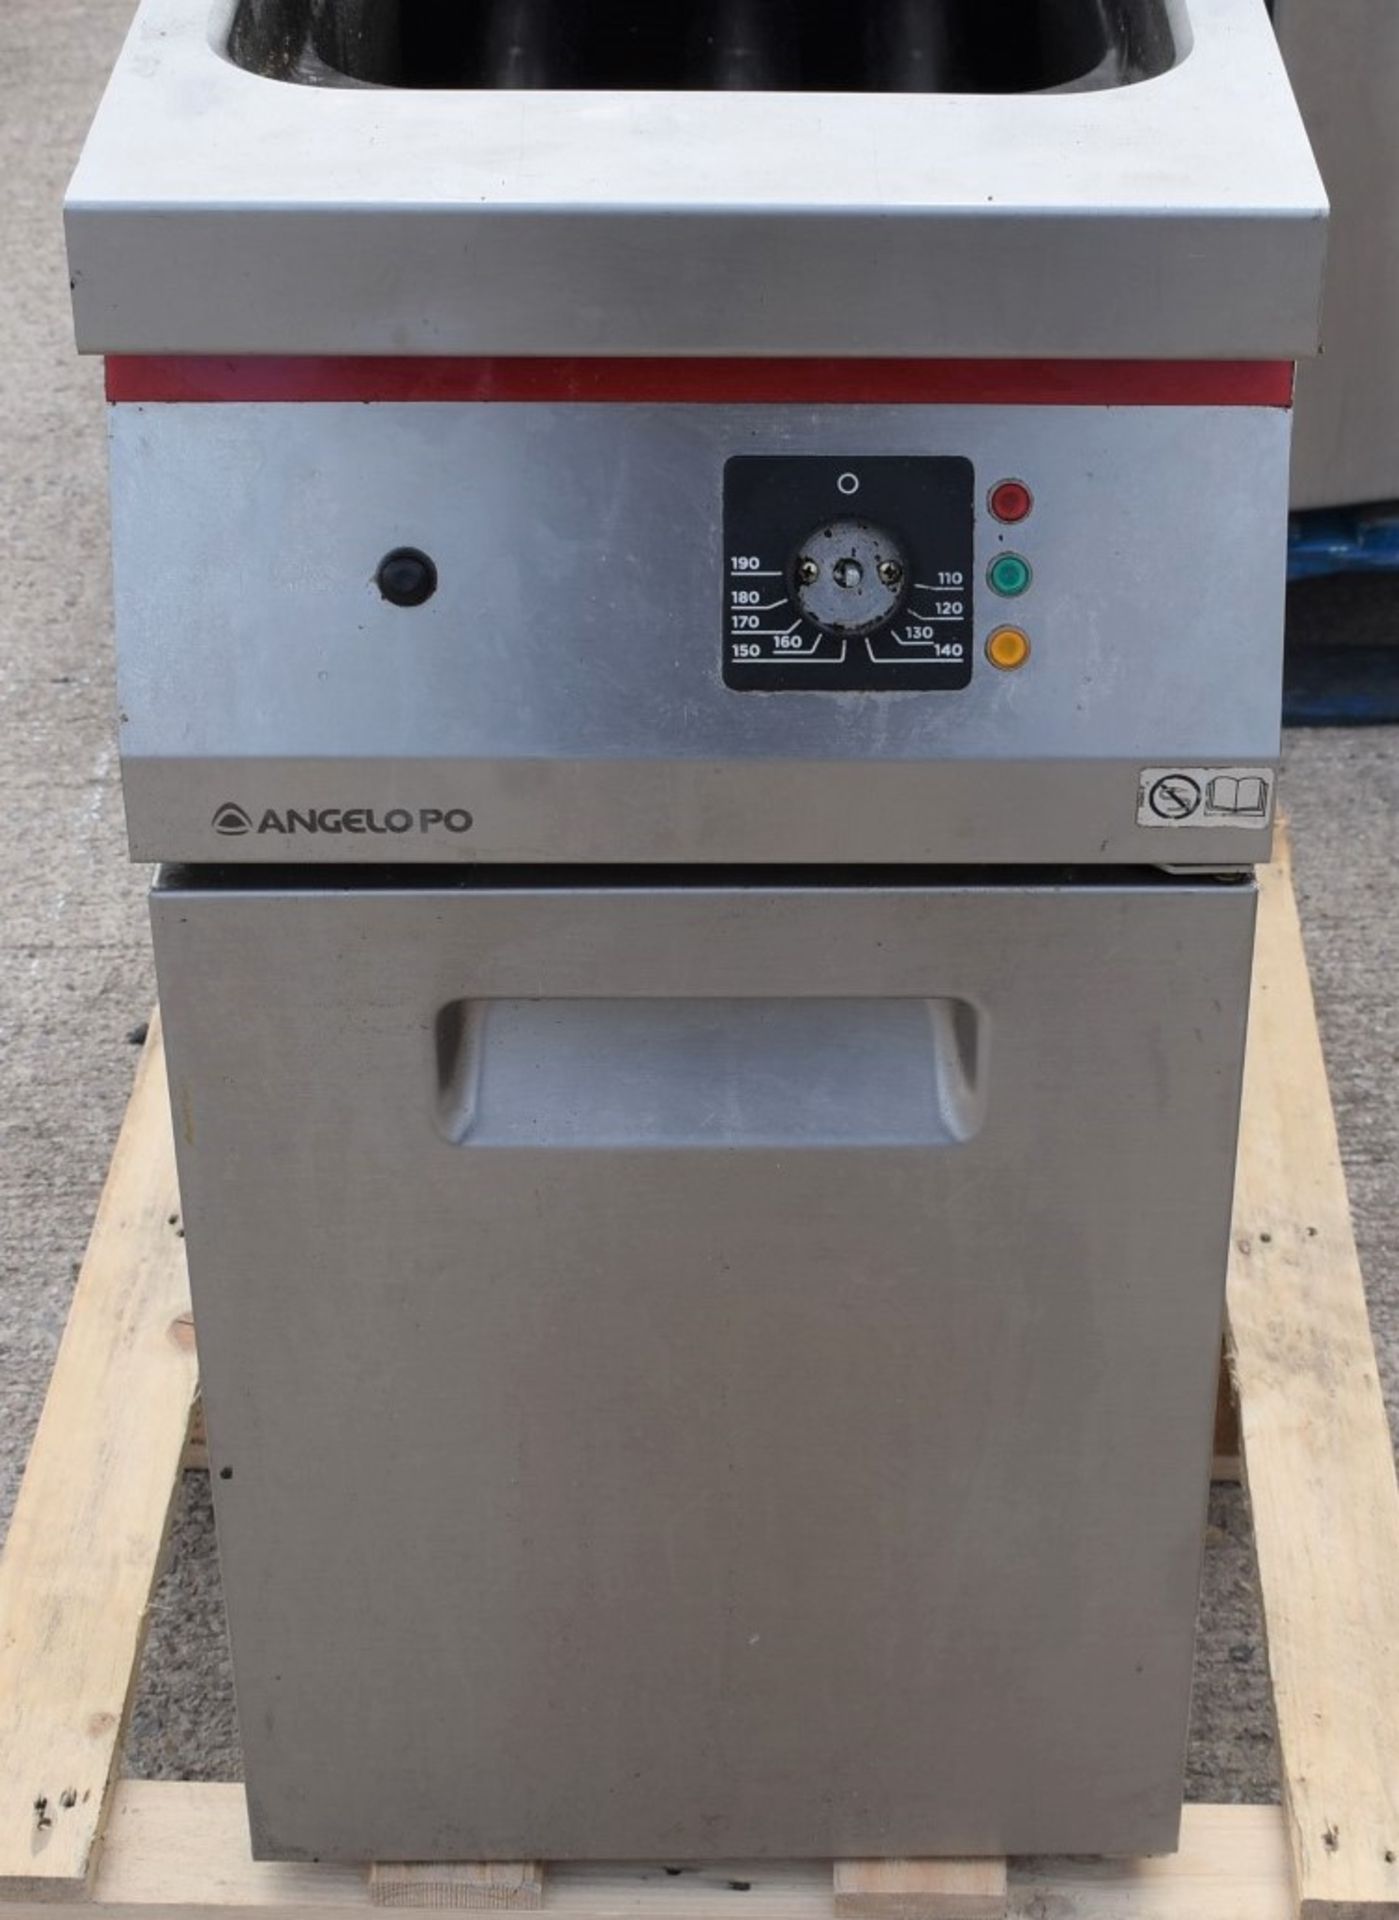 1 x Angelo Po Single Tank Gas Fryer With Baskets - AISI 304 Stainless Steel Finish - Latest Design - Image 3 of 5